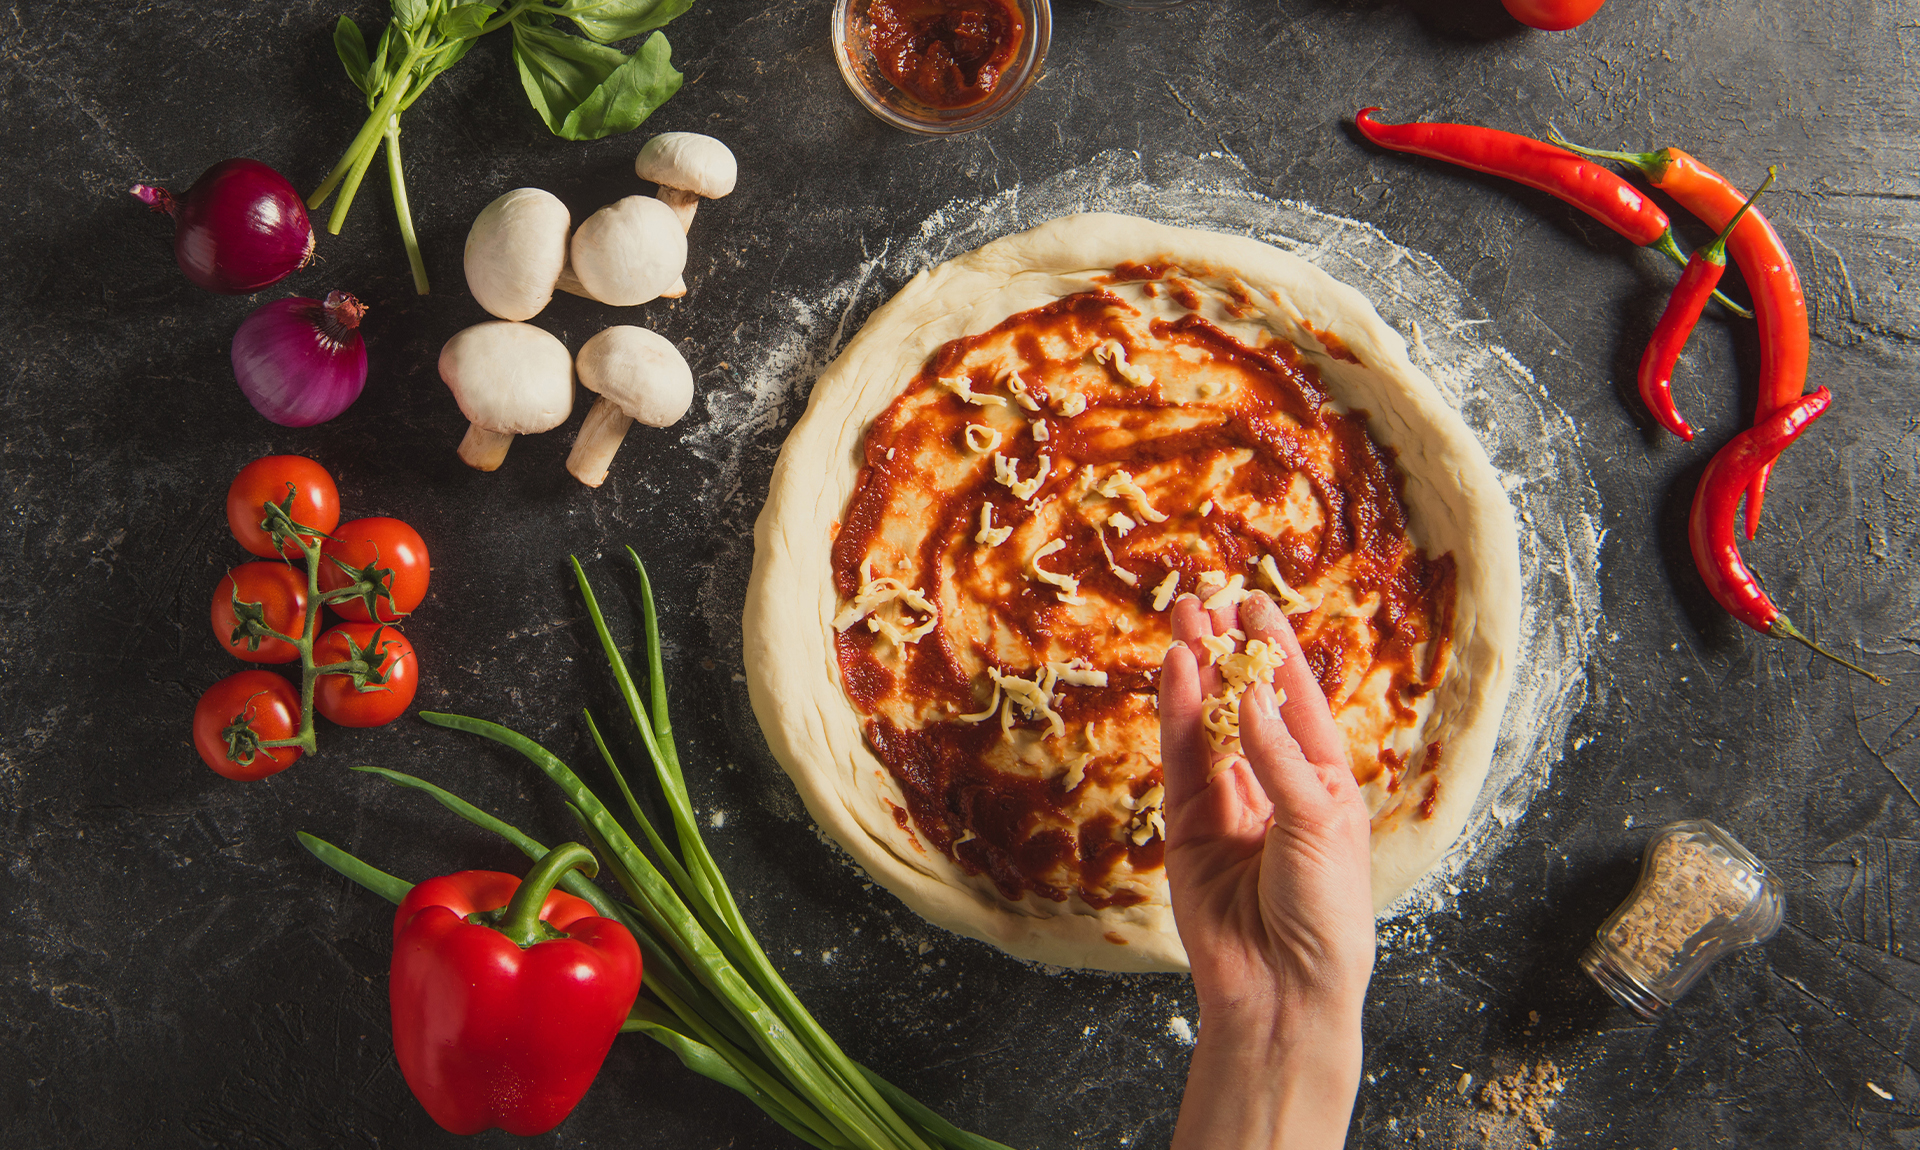 DIY Pizza Party: Make Your Own Pizza With Roastea